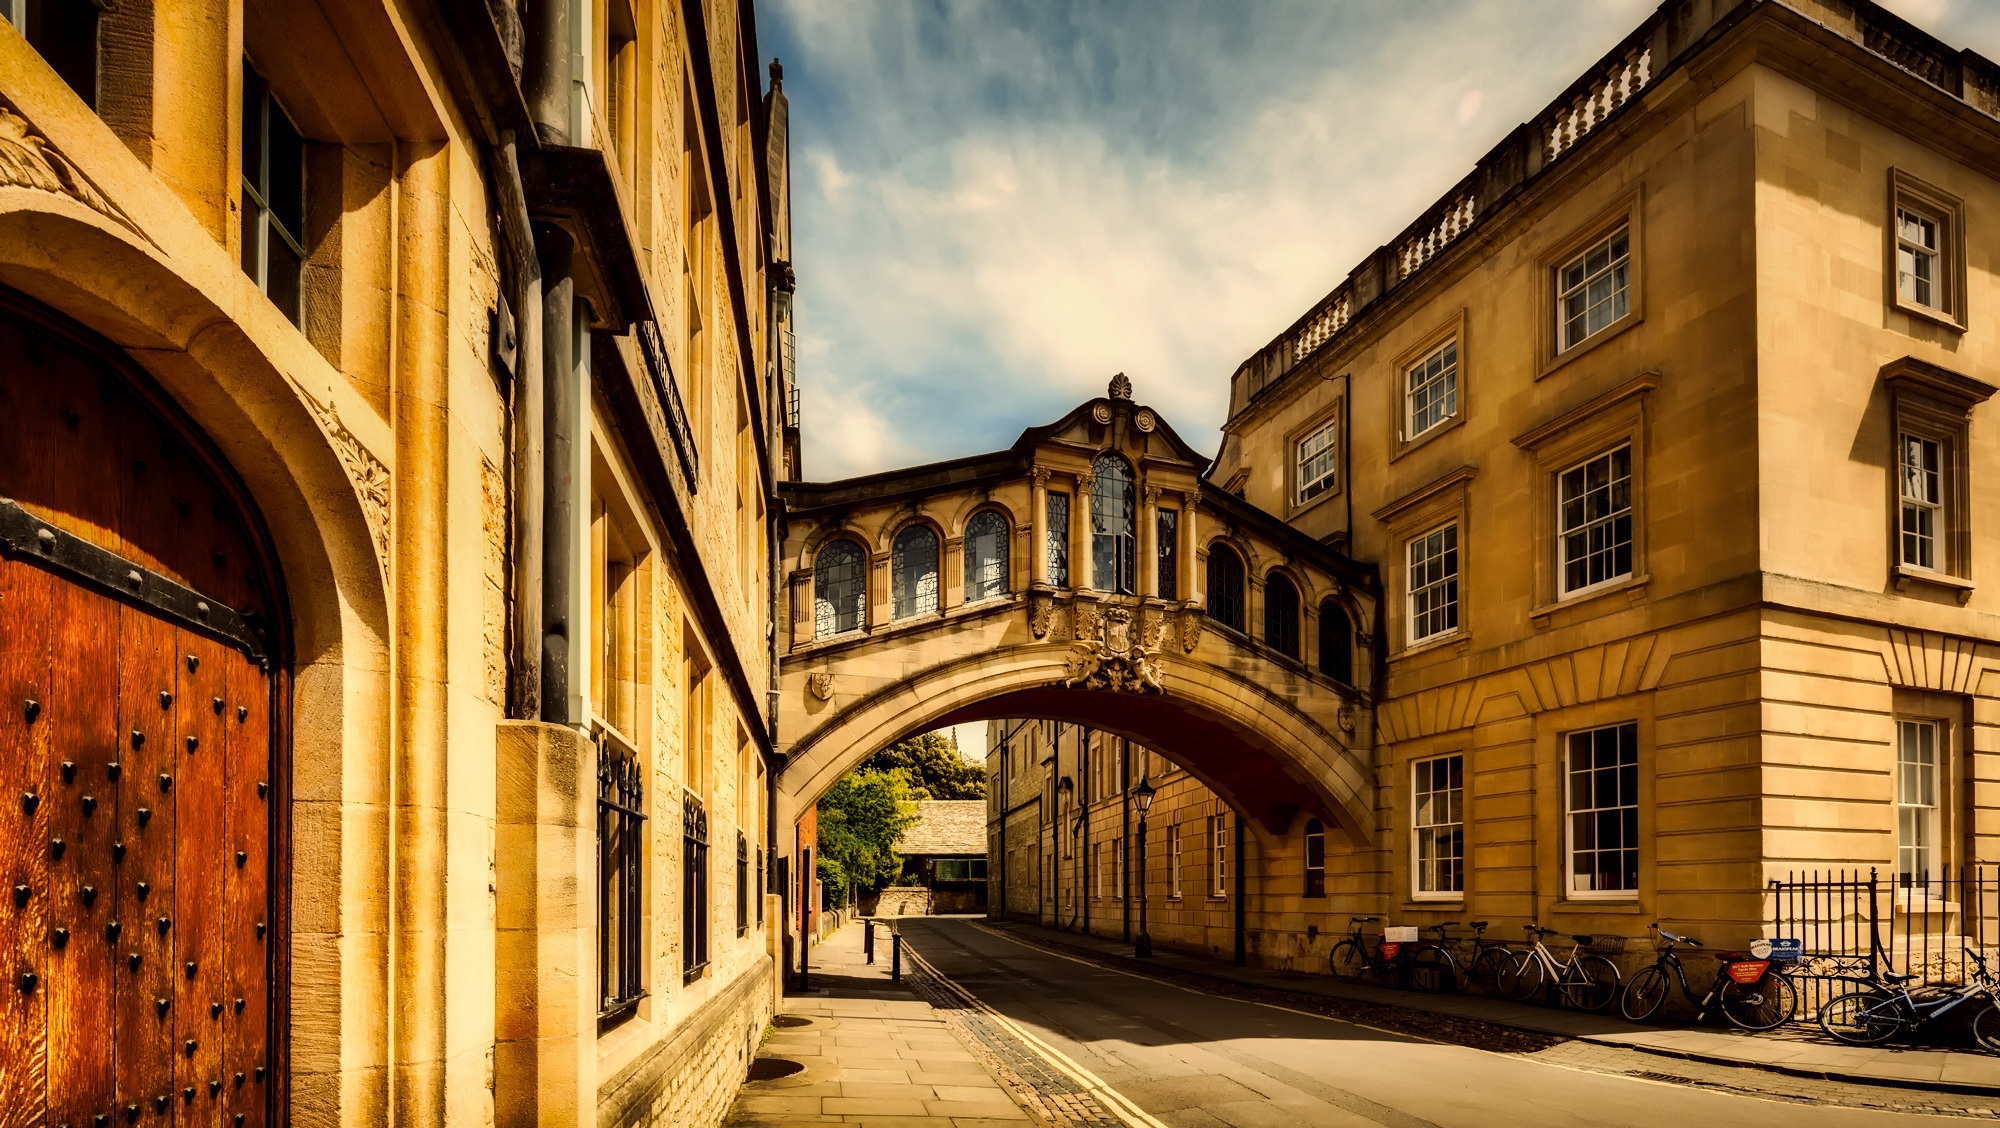 A view of a college in Oxford, UK